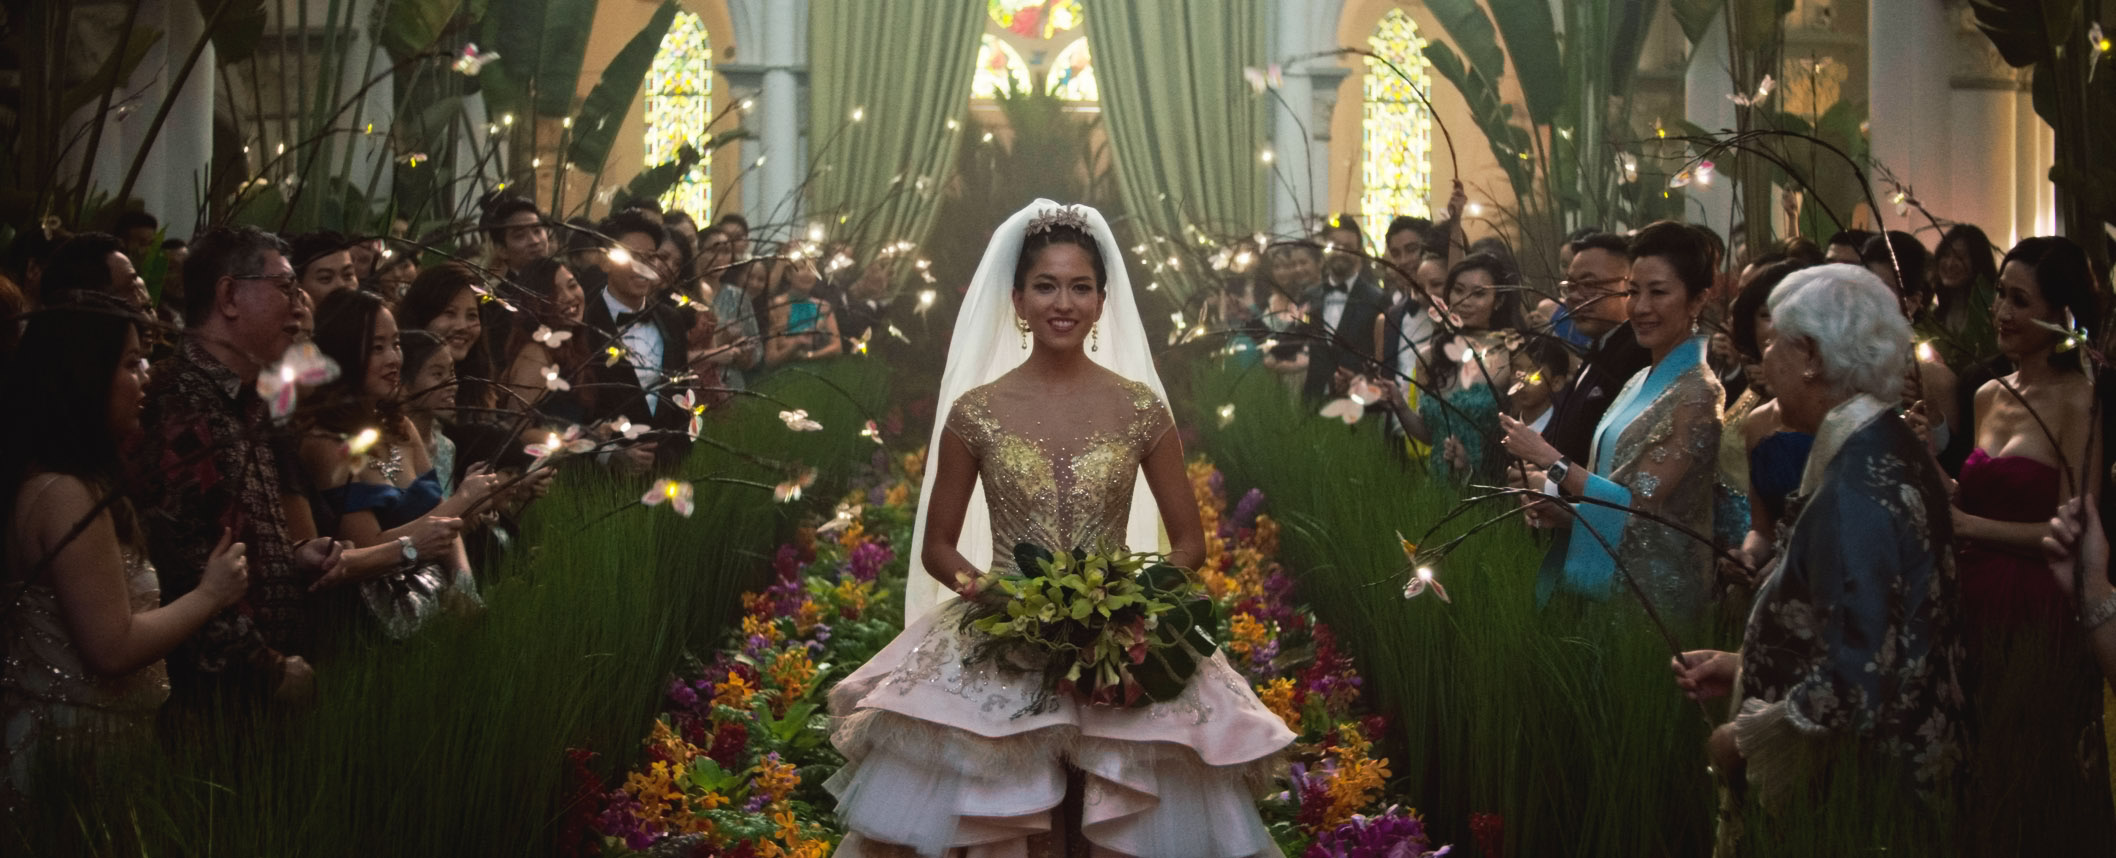 A scene from Warner Bros. Pictures' and SK Global Entertainment's contemporary romantic comedy "CRAZY RICH ASIANS," a Warner Bros. Pictures release. Photo Credit: Courtesy of Warner Bros. Pictures